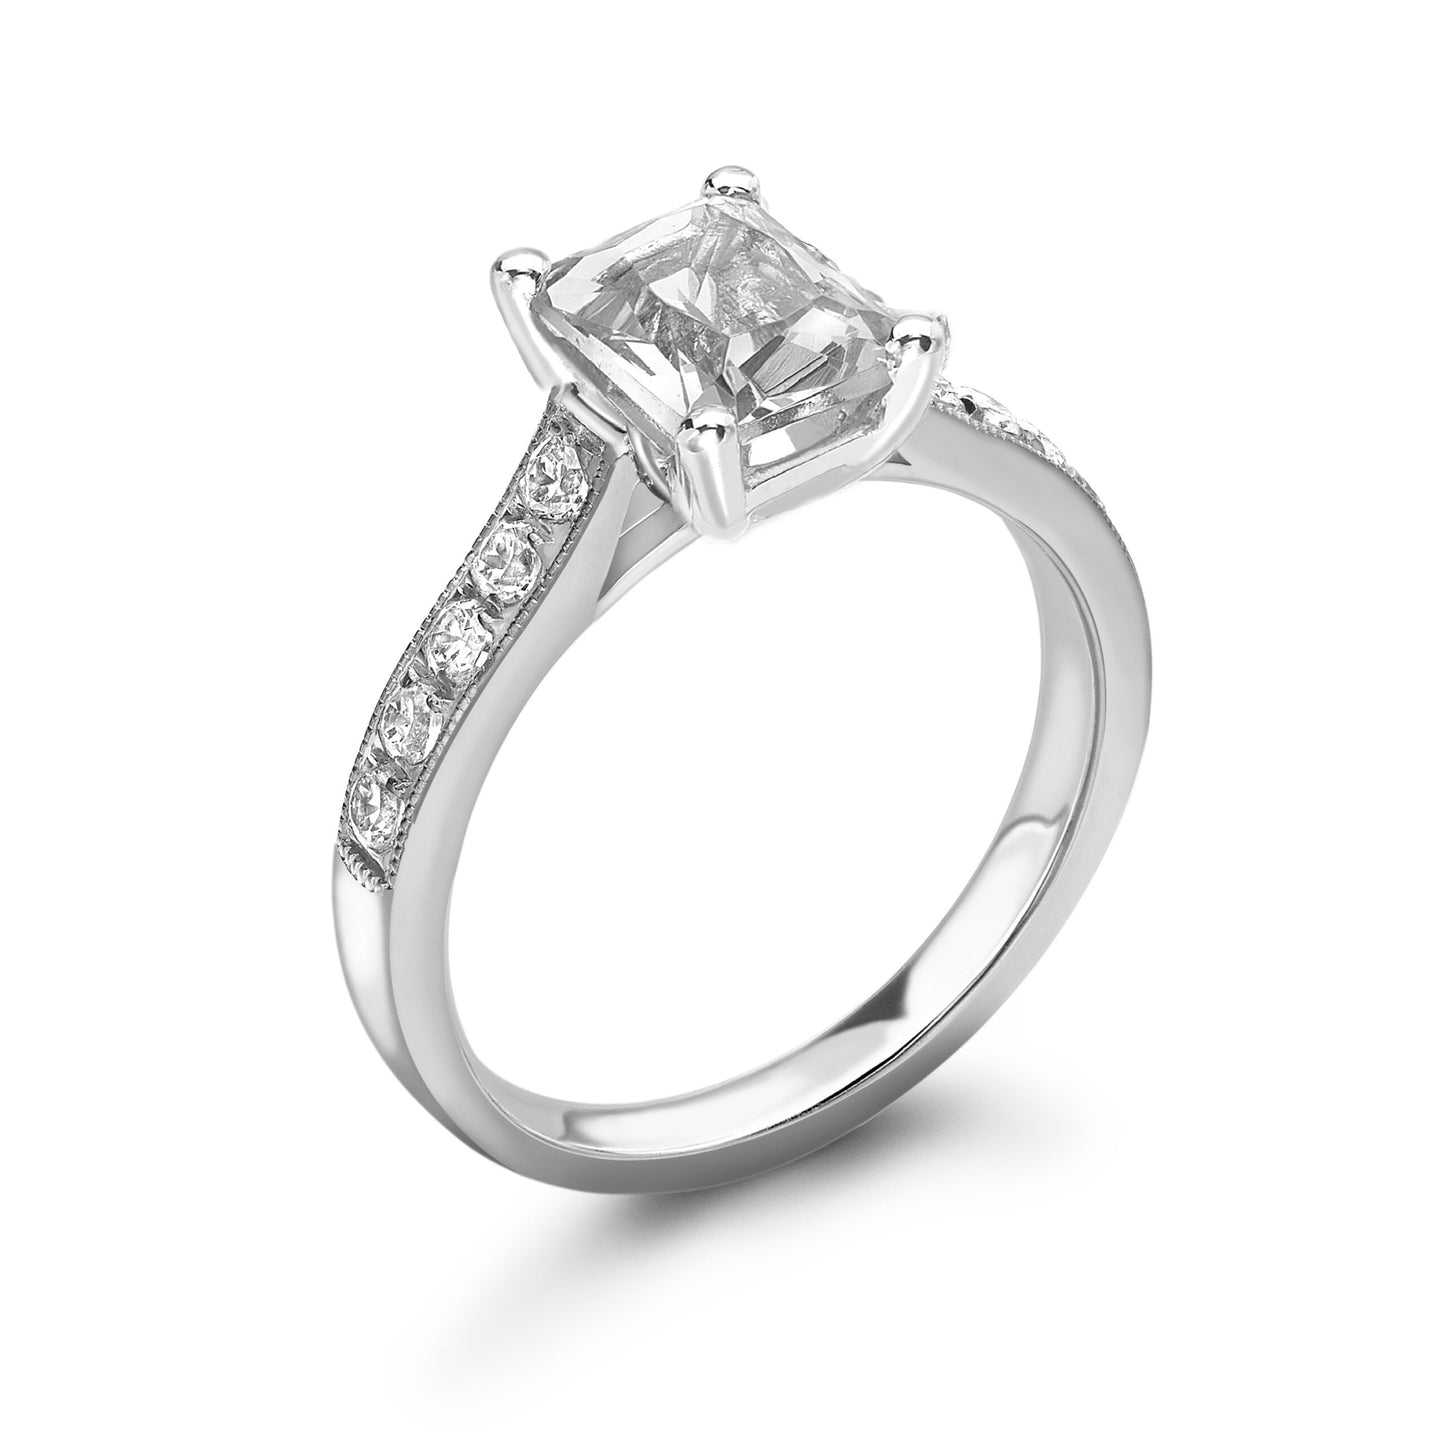 Cushion Pave Diamond ring in White Gold